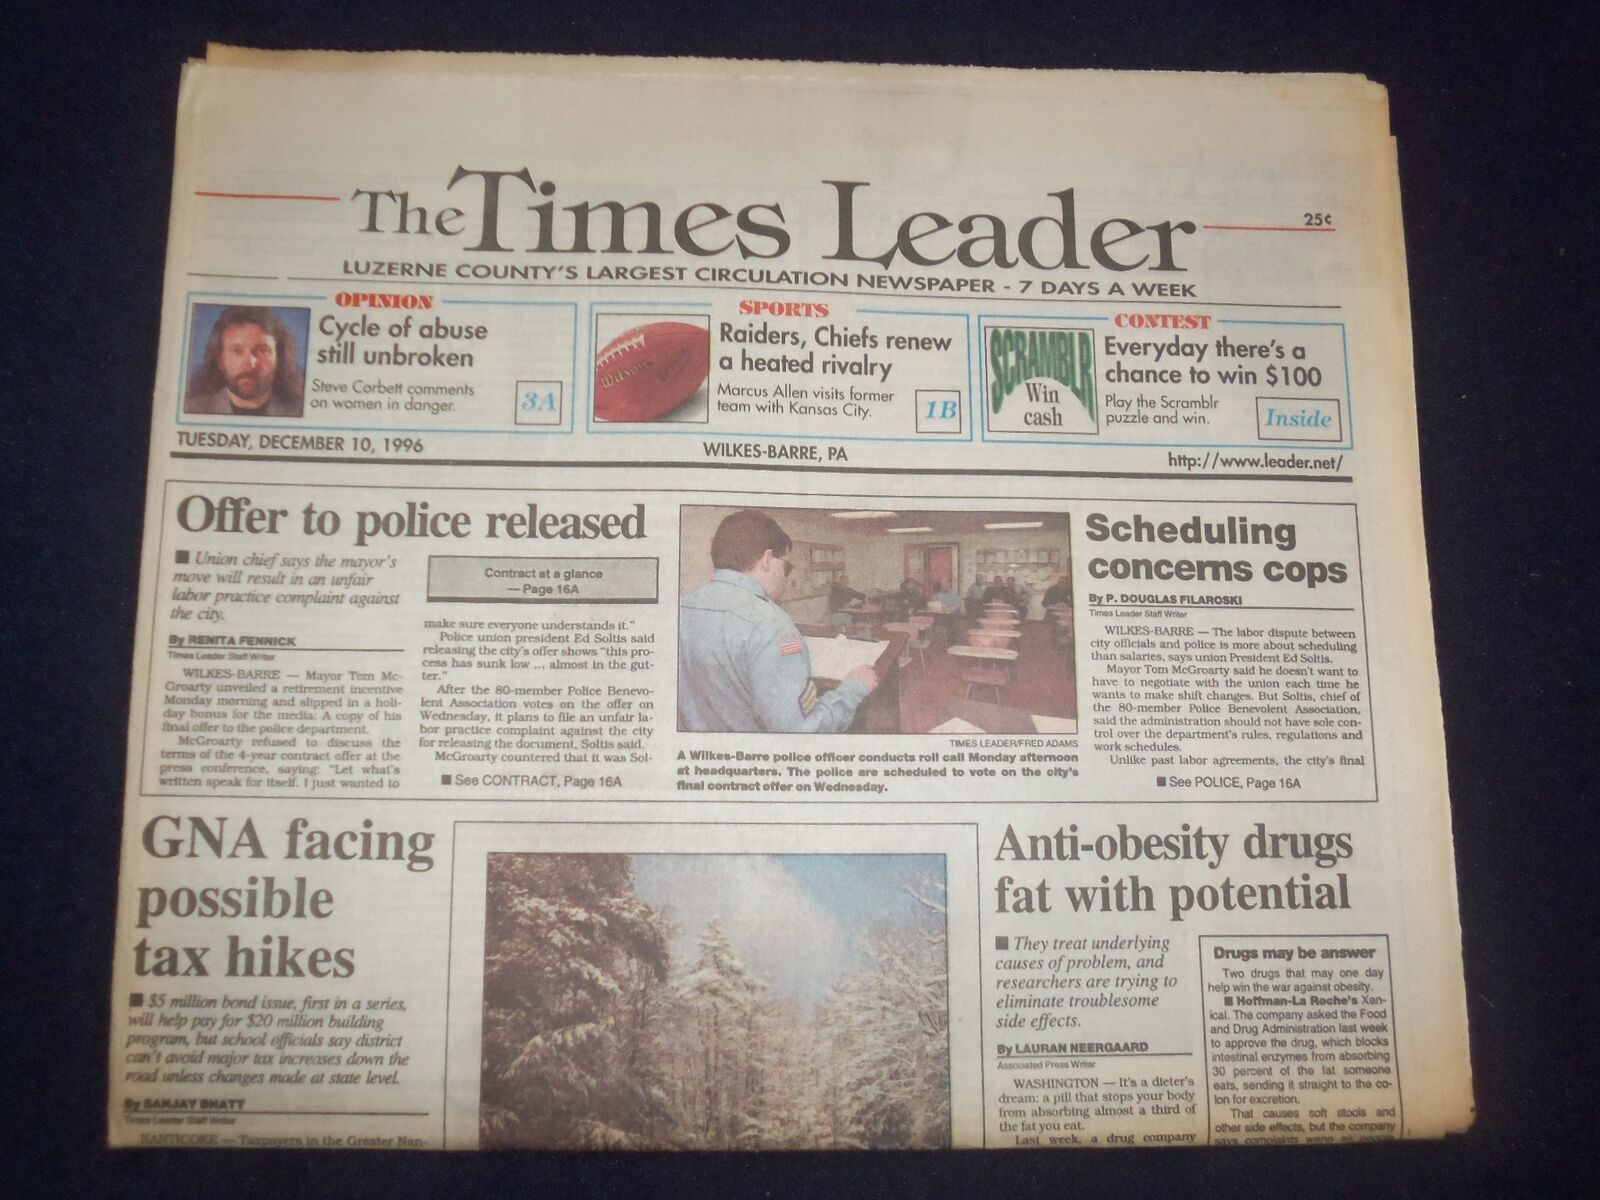 1996 DEC 10 WILKES-BARRE TIMES LEADER - GNA FACING POSSIBLE TAX HIKES - NP 8174